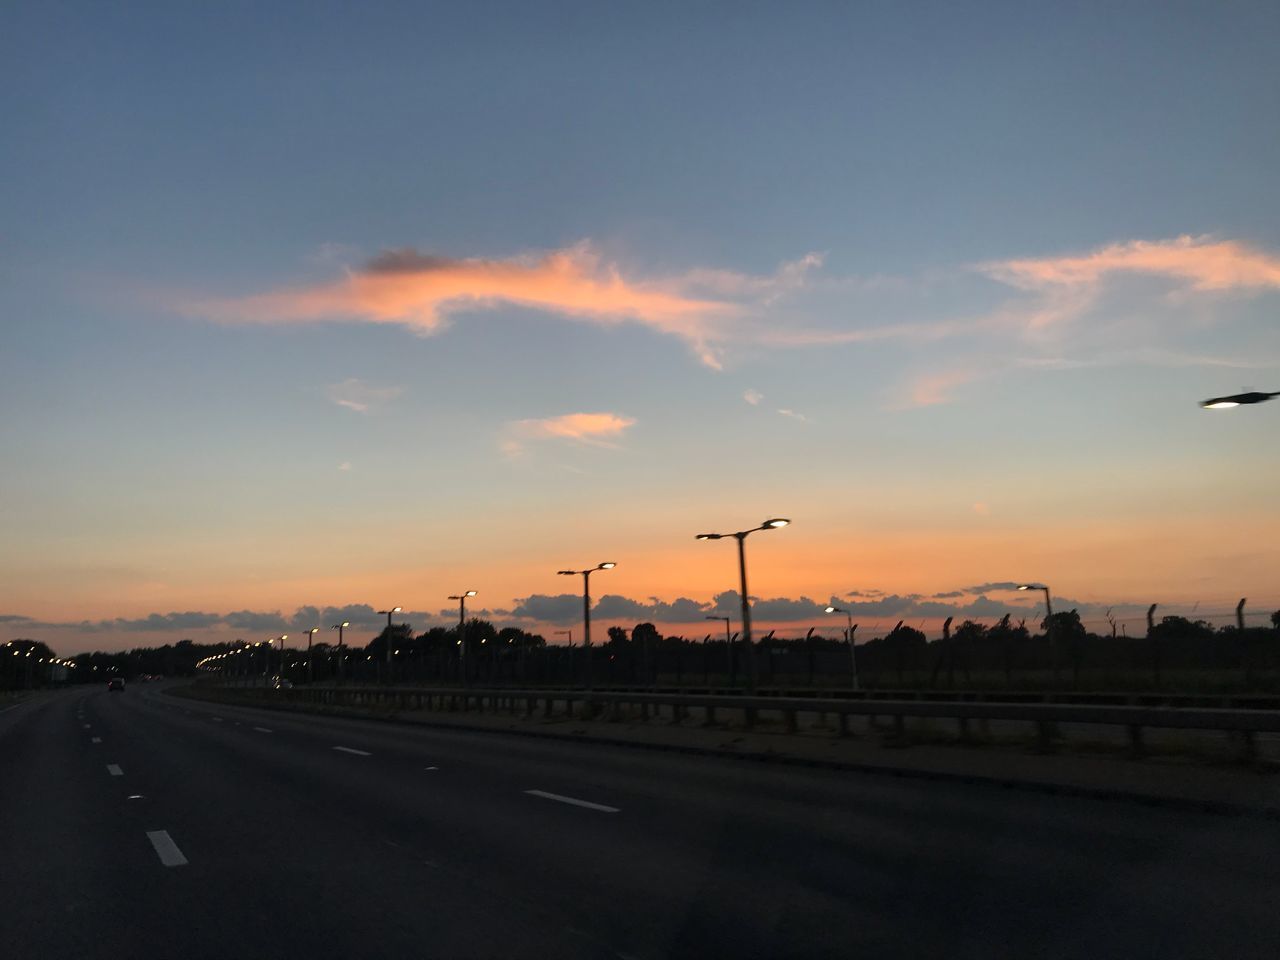 sky, sunset, road, transportation, cloud - sky, nature, orange color, street, no people, mode of transportation, car, motor vehicle, beauty in nature, the way forward, land vehicle, outdoors, direction, city, highway, scenics - nature